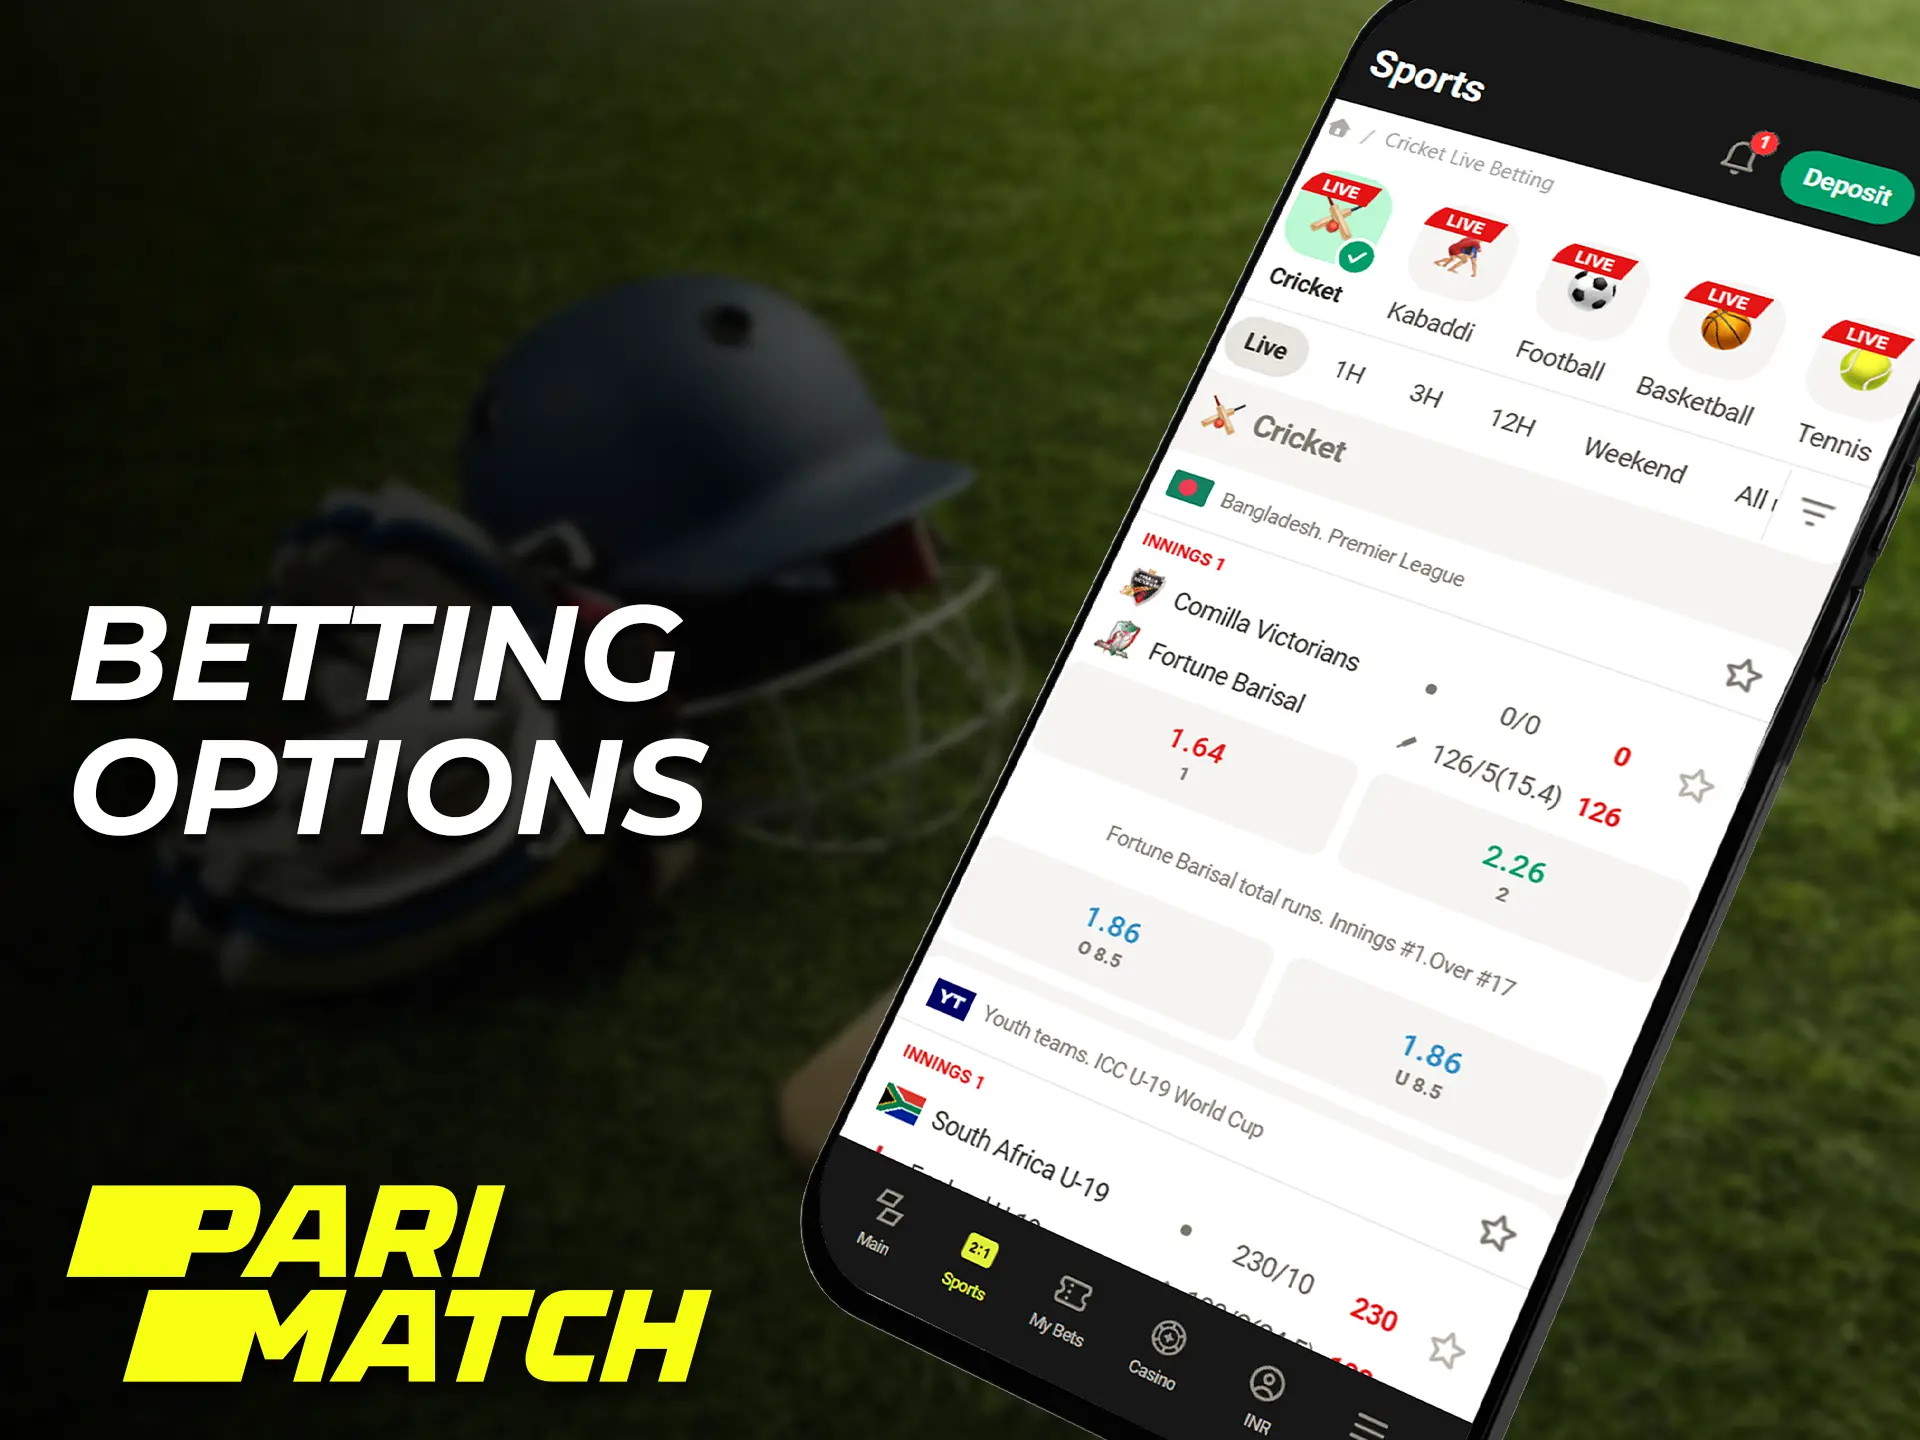 Review of betting options in the Parimatch app.